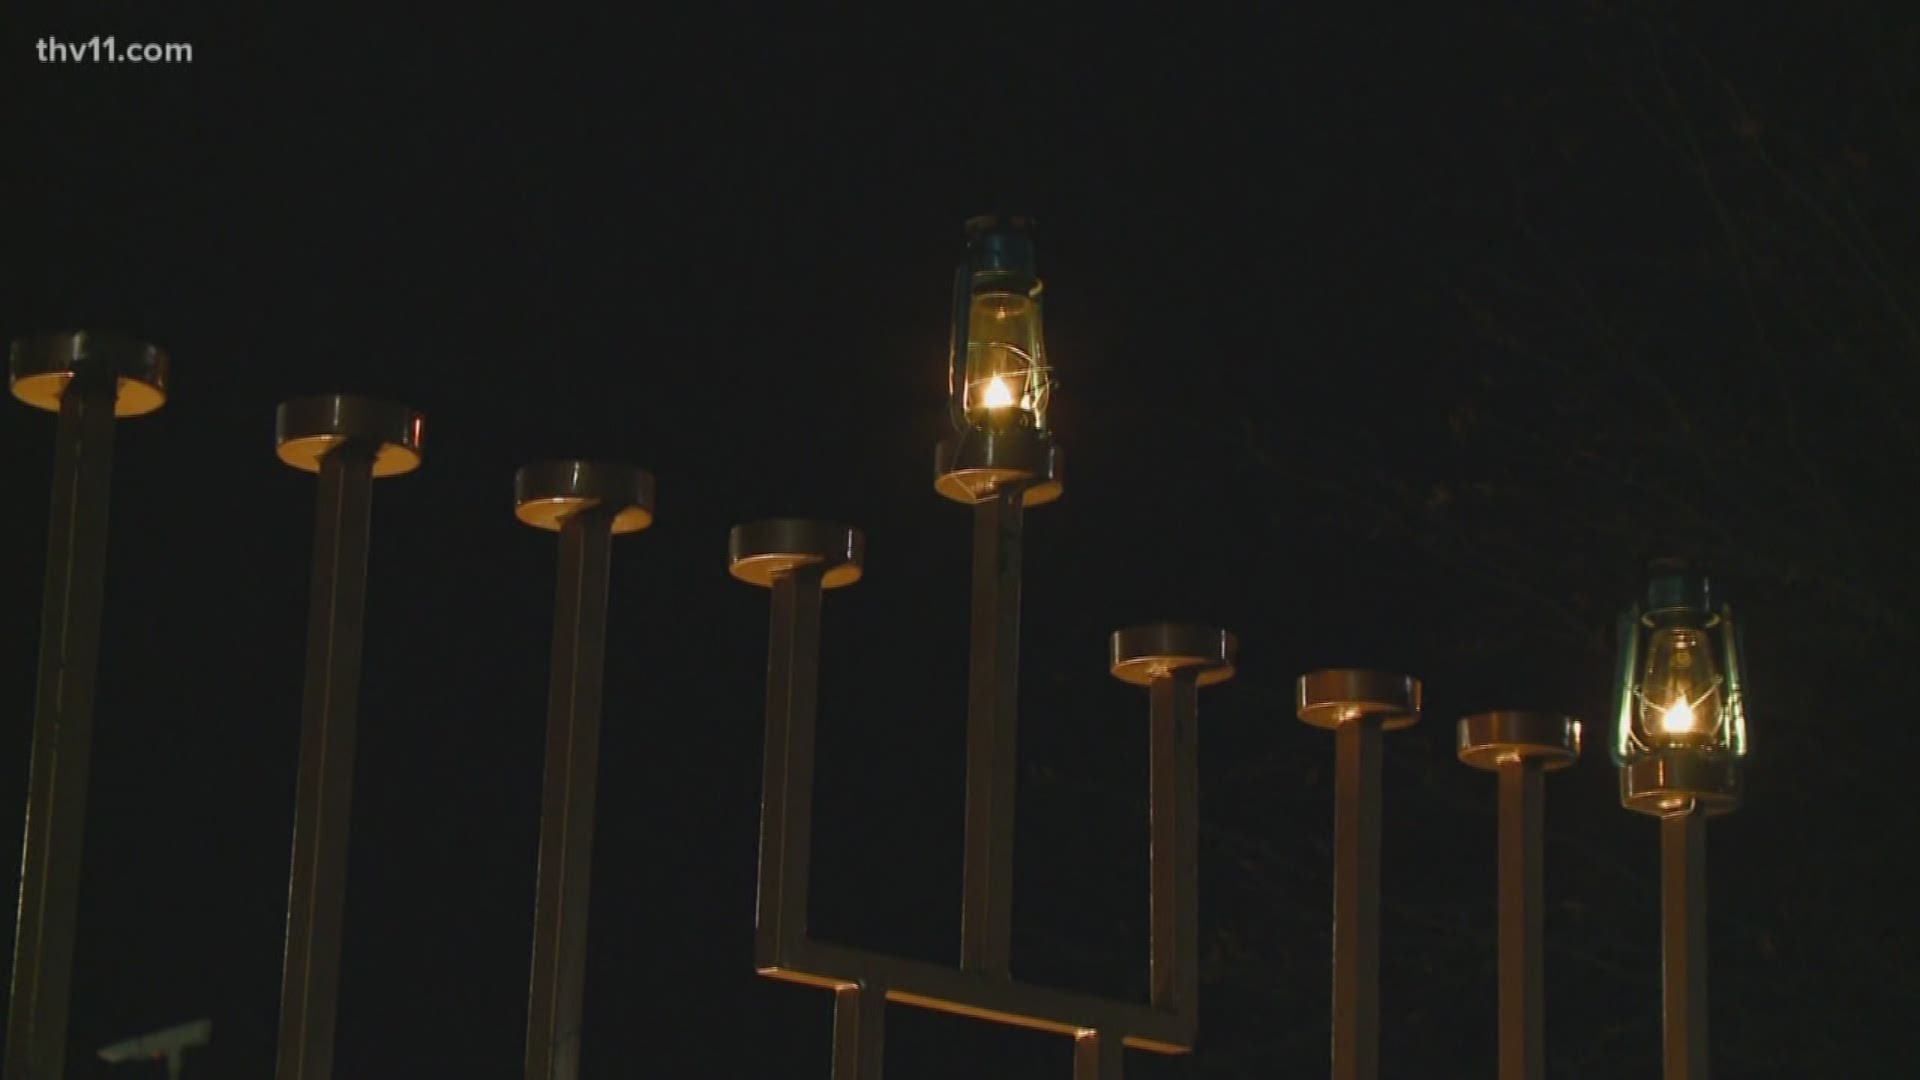 Dozens of people celebrated the first night of Chanukah tonight by lighting a giant menorah in West little Rock.